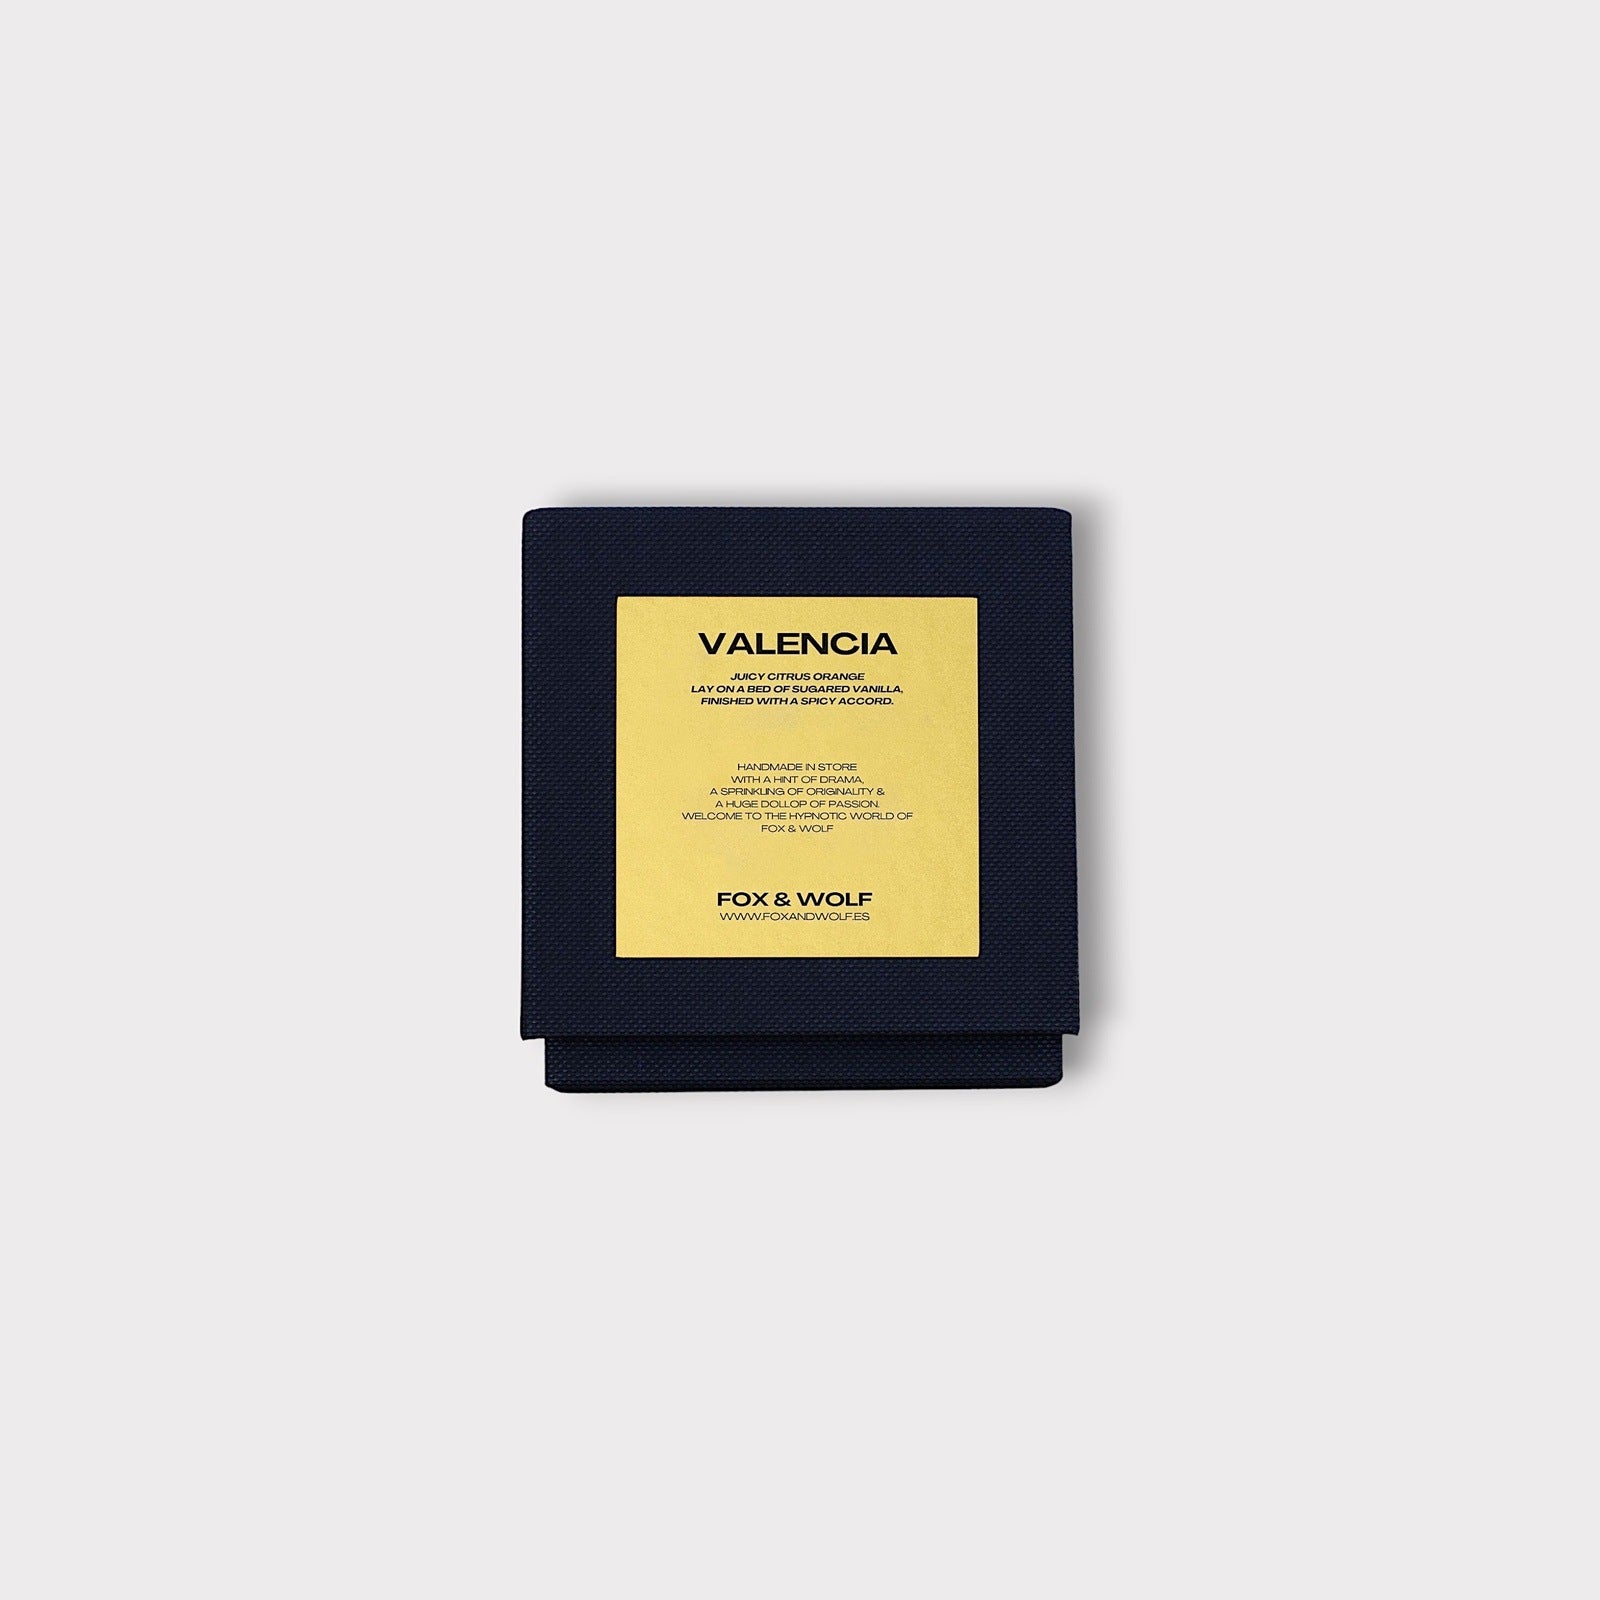 300 G VALENCIA SCENTED CANDLE